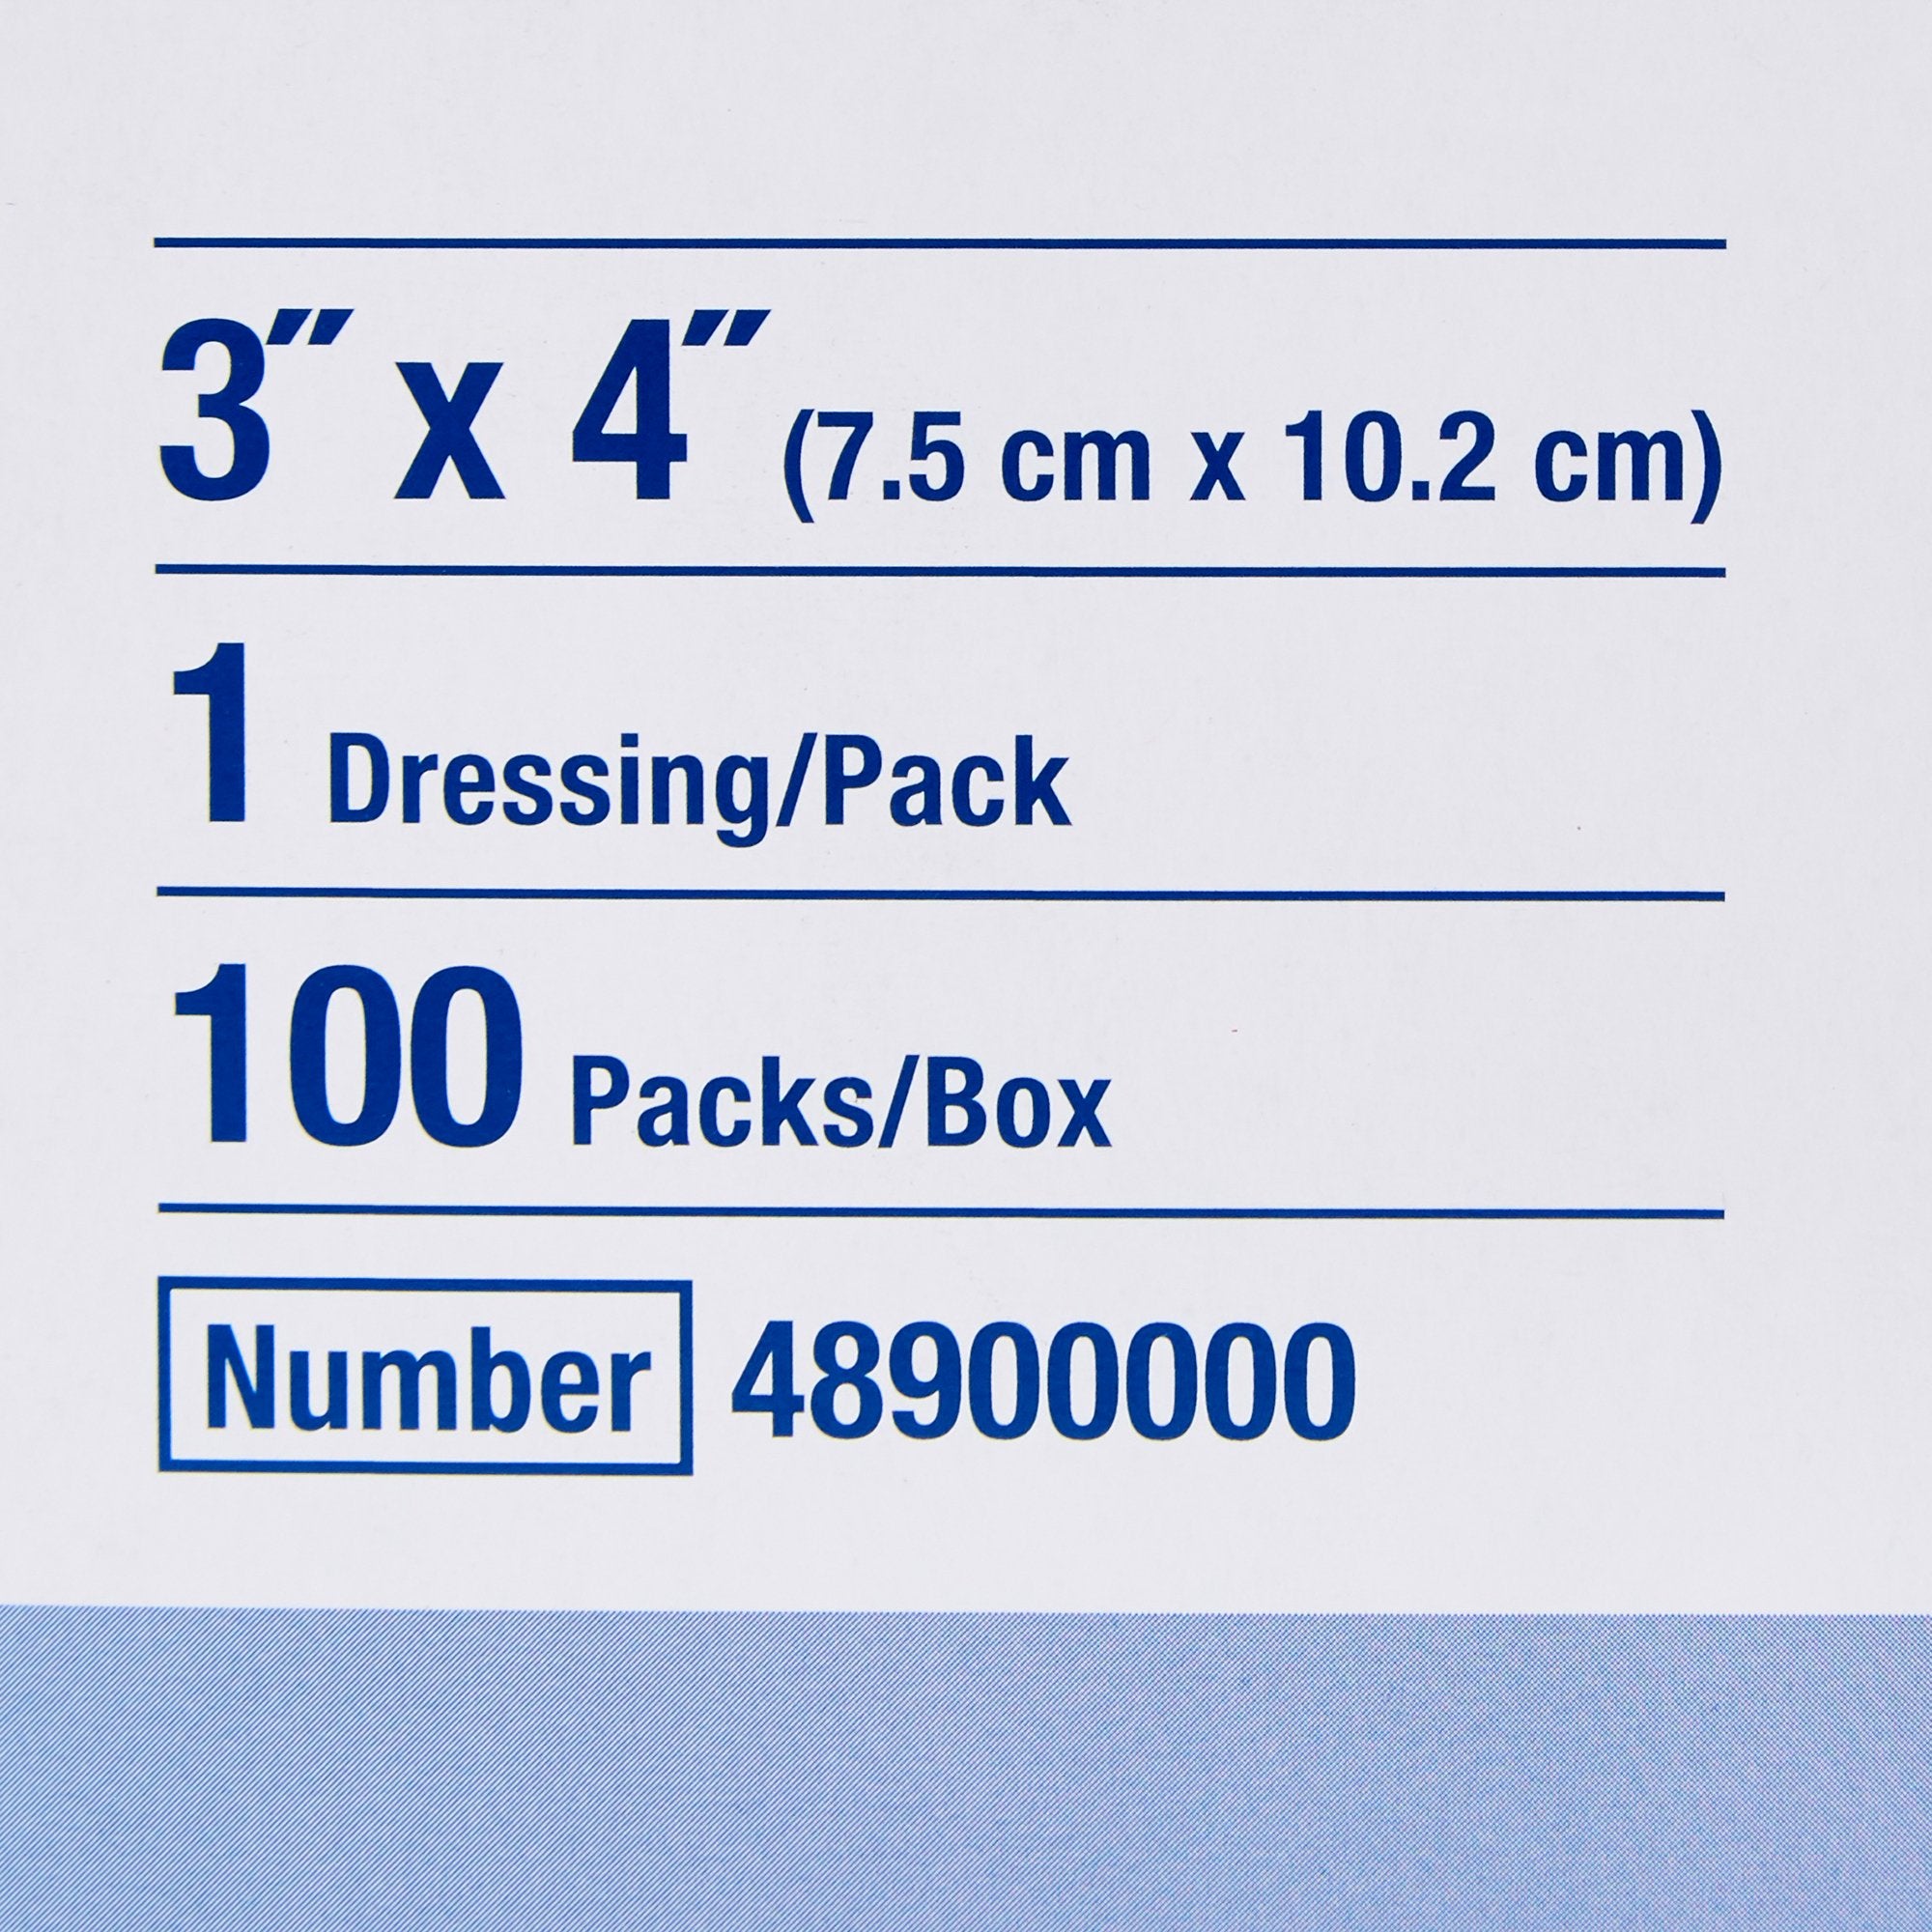 Non-Adherent Dressing Sorbalux® 3 X 4 Inch Sterile Rectangle